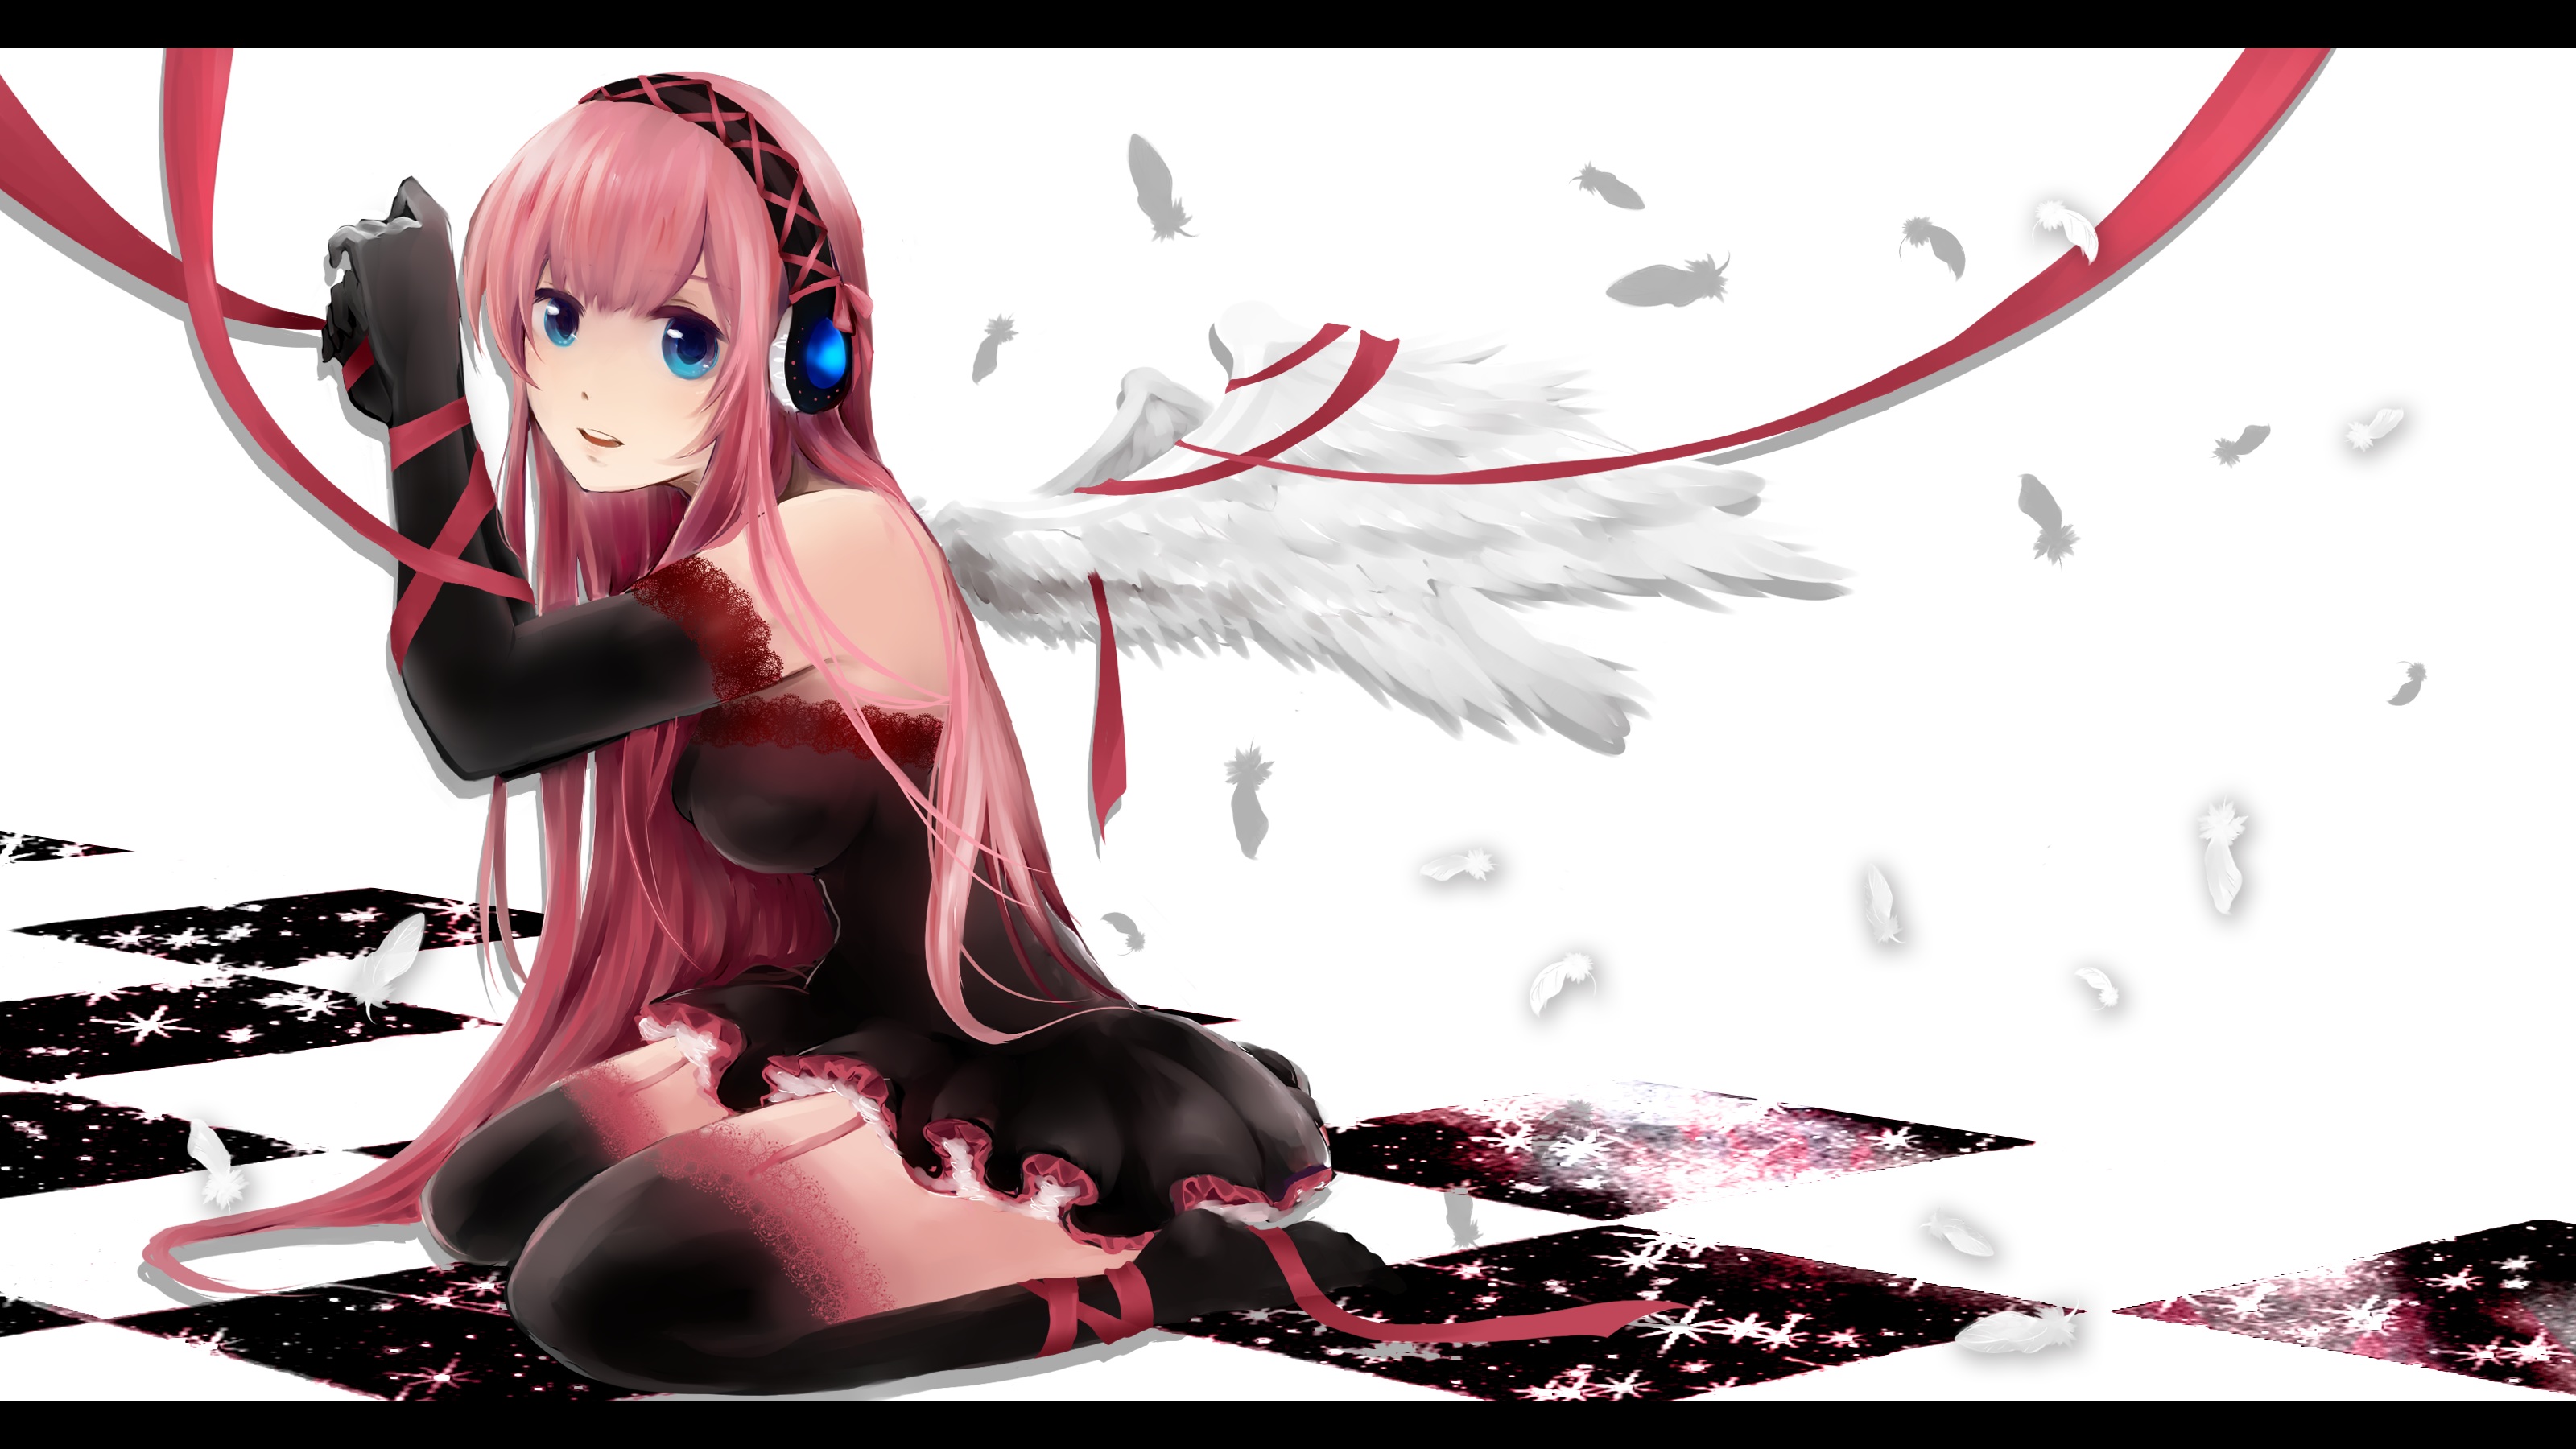 vocaloid, Acotamago, Blue, Eyes, Dress, Elbow, Gloves, Feathers, Headphones, Long, Hair, Megurine, Luka, Pink, Hair, Ribbons, Stockings, Vocaloid, Wings Wallpaper